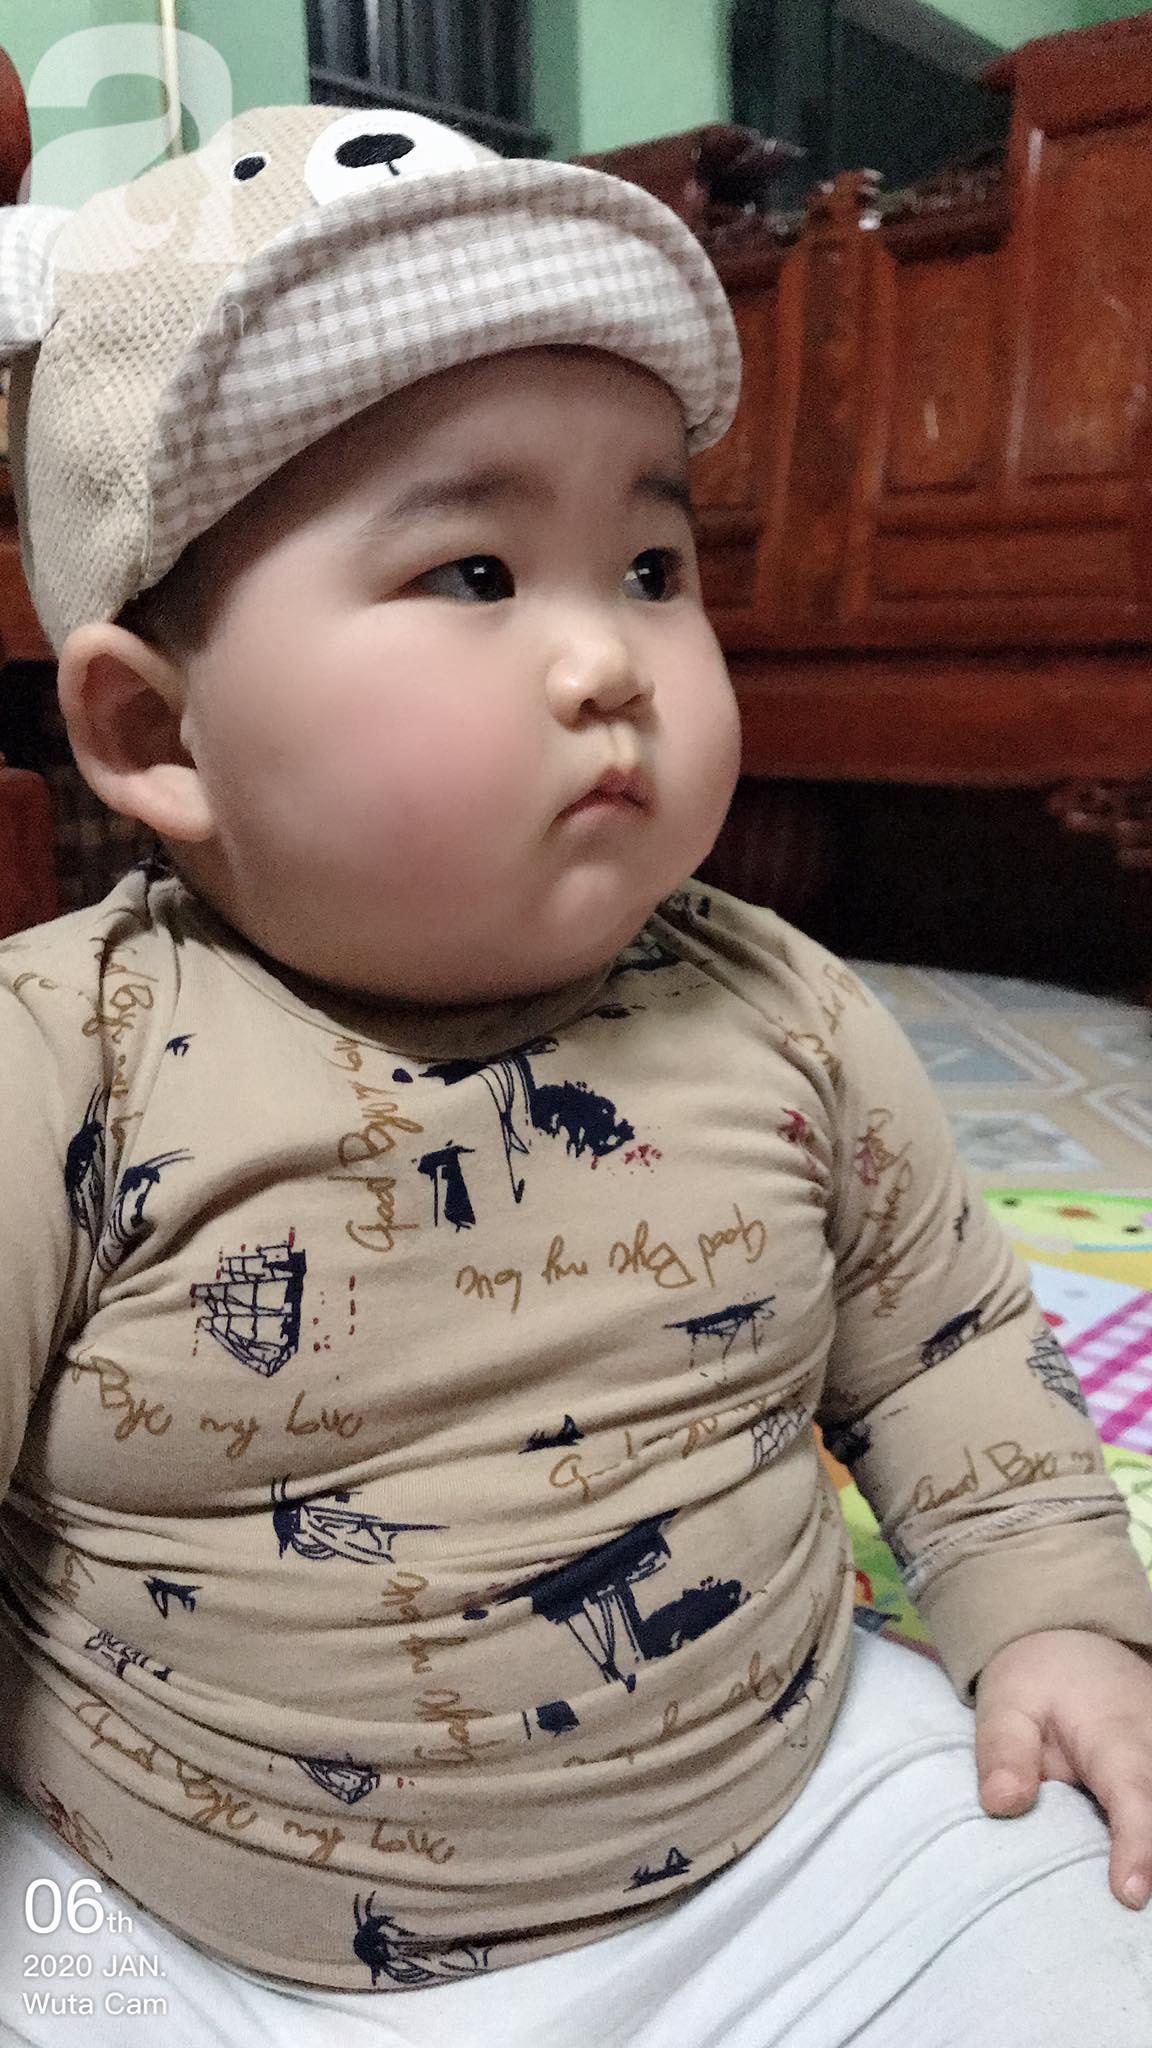 Cute fat babies are something everyone loves, and you are no exception. Take a look at the beautiful pictures of those babies, you will definitely be attracted by their sweetness.